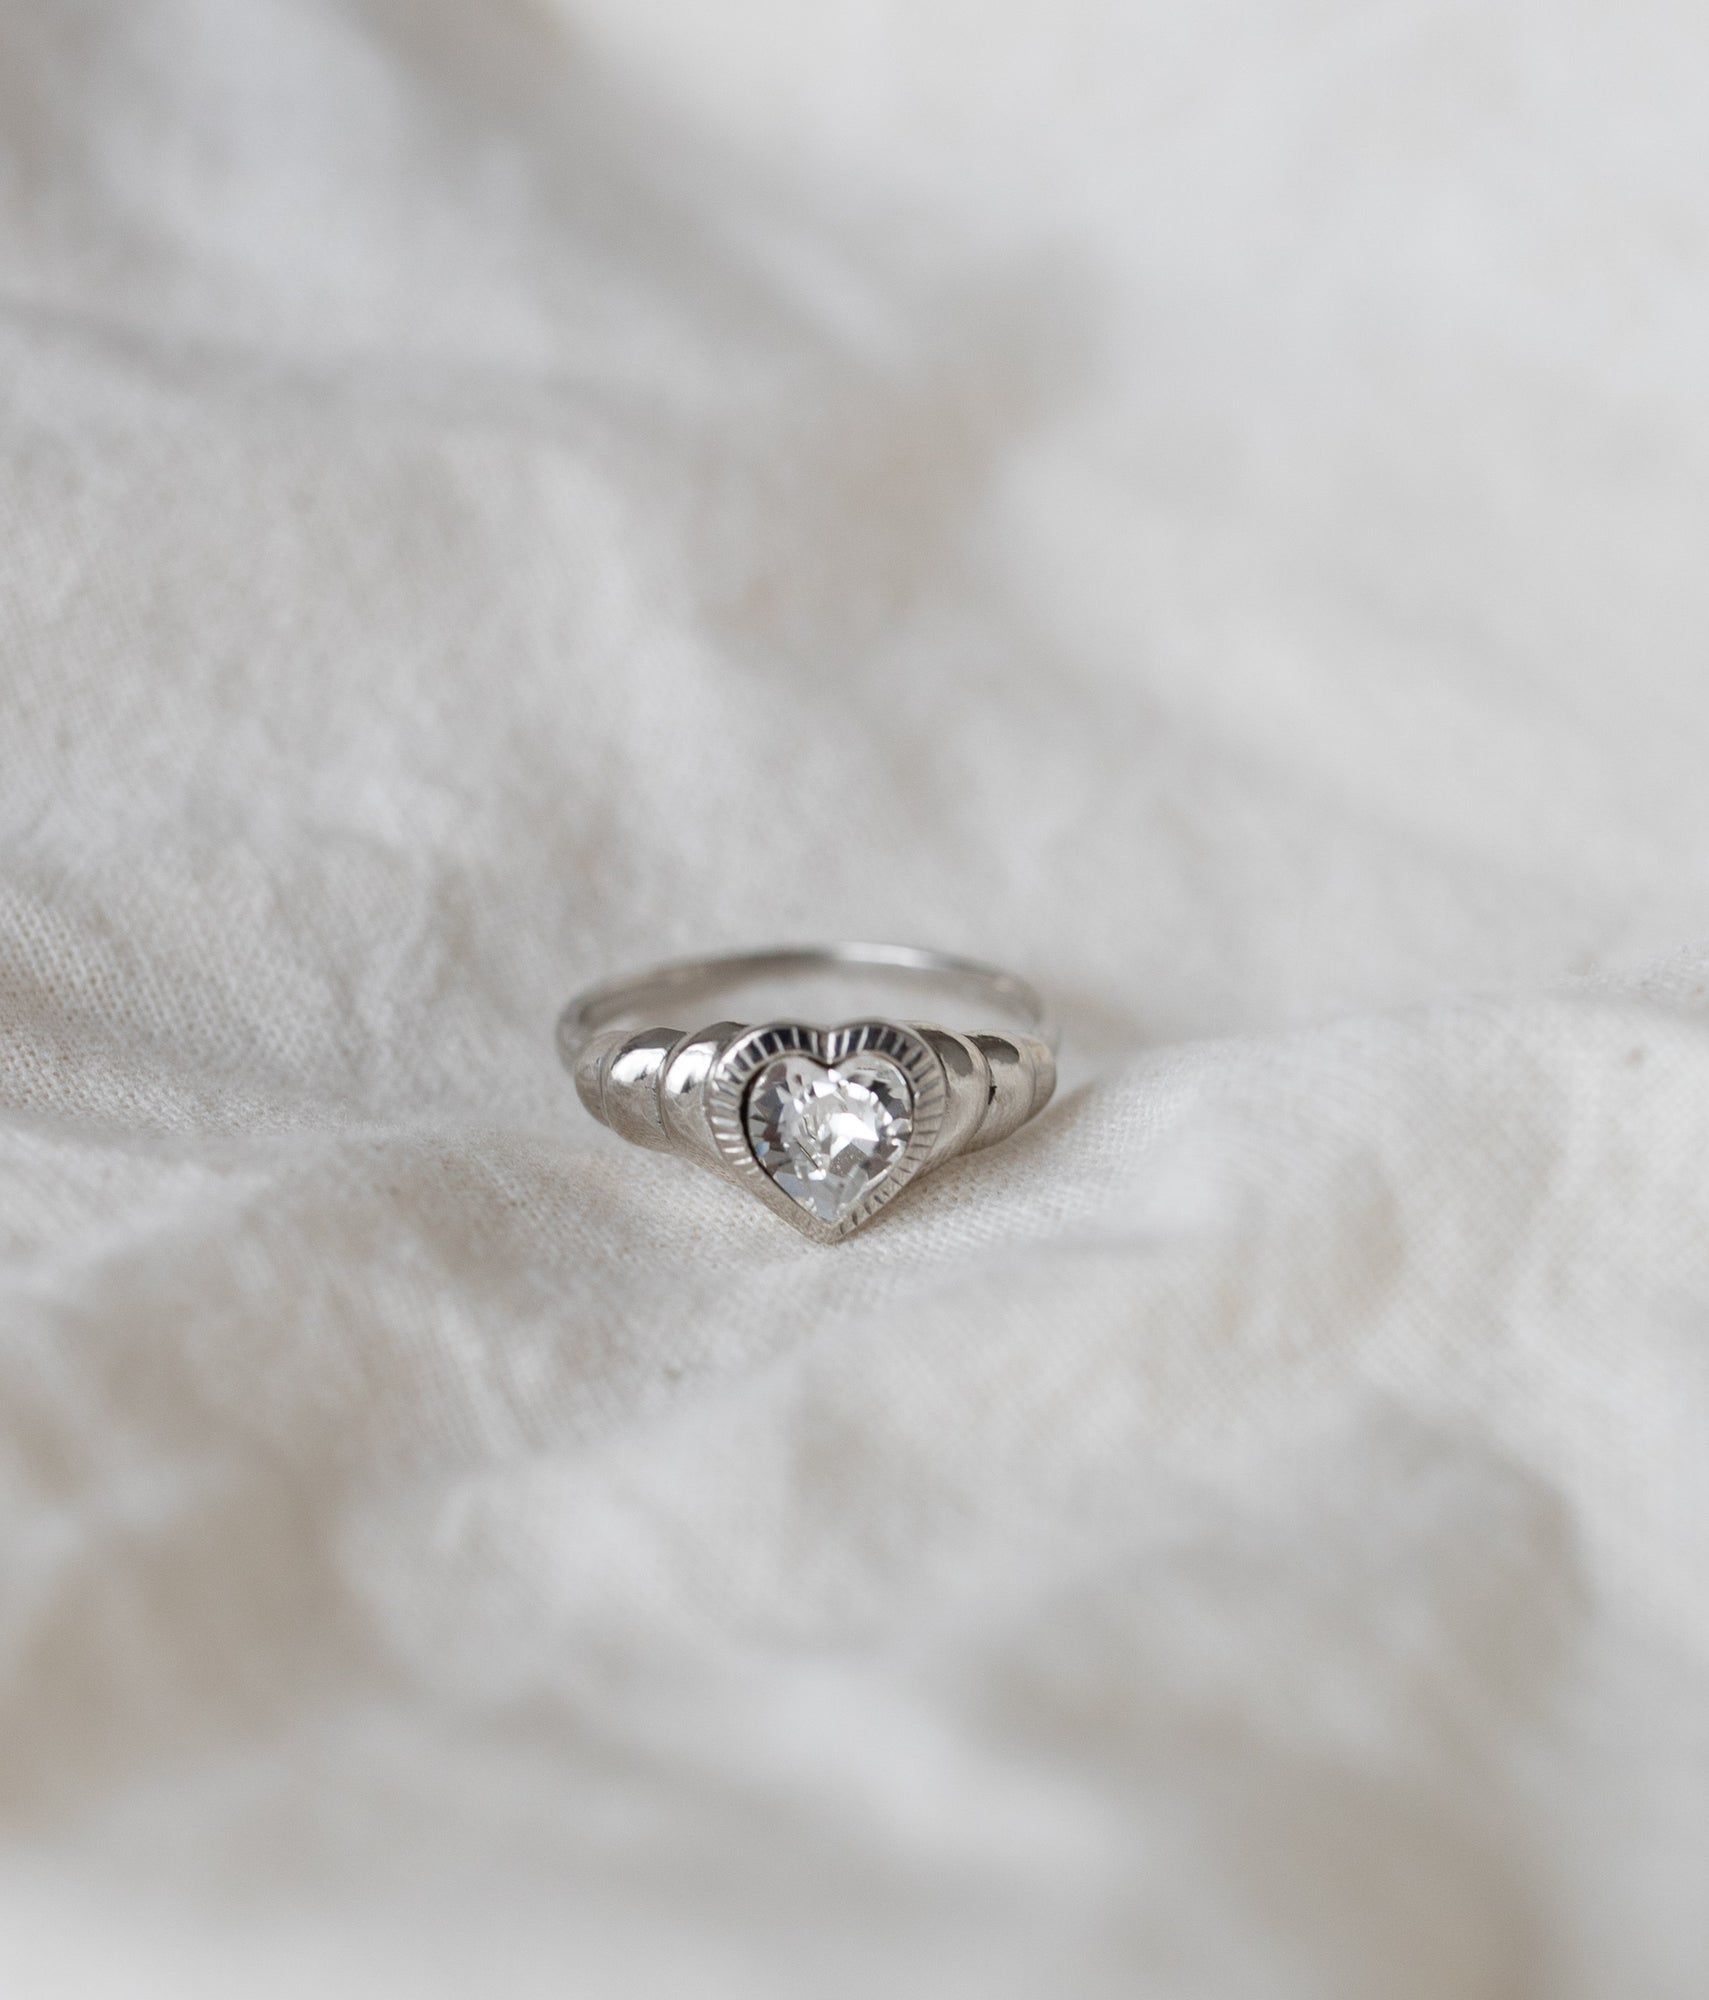 Be My Lover Mini Silver Ring by WALD Berlin on a textured white fabric background.